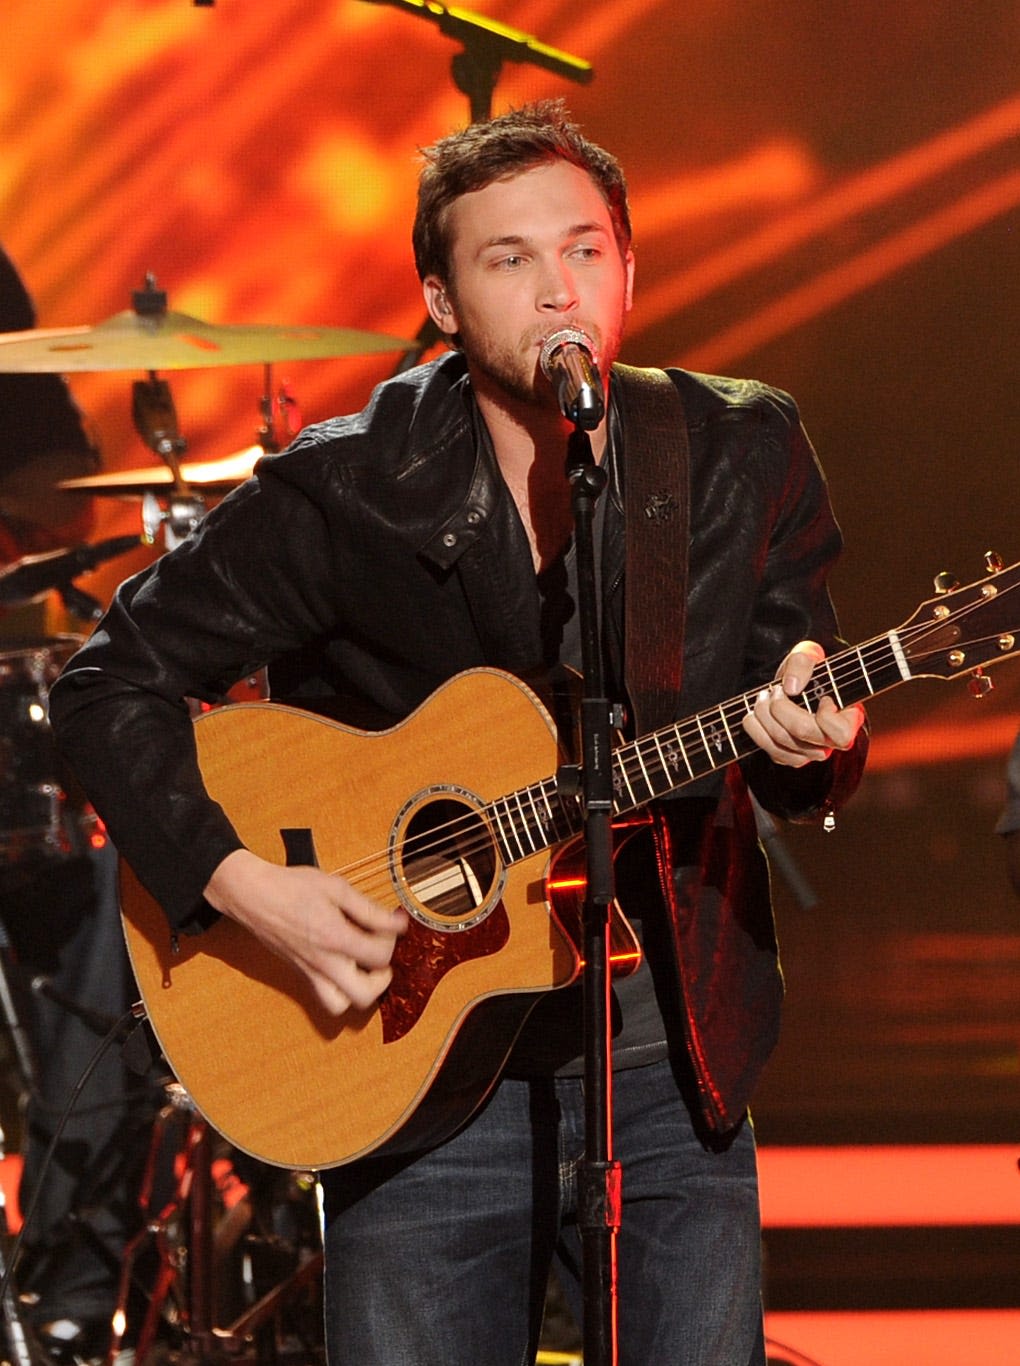 Phillip Phillips, famous for his song 'Home,' will sing 'God Bless America' at Indy 500